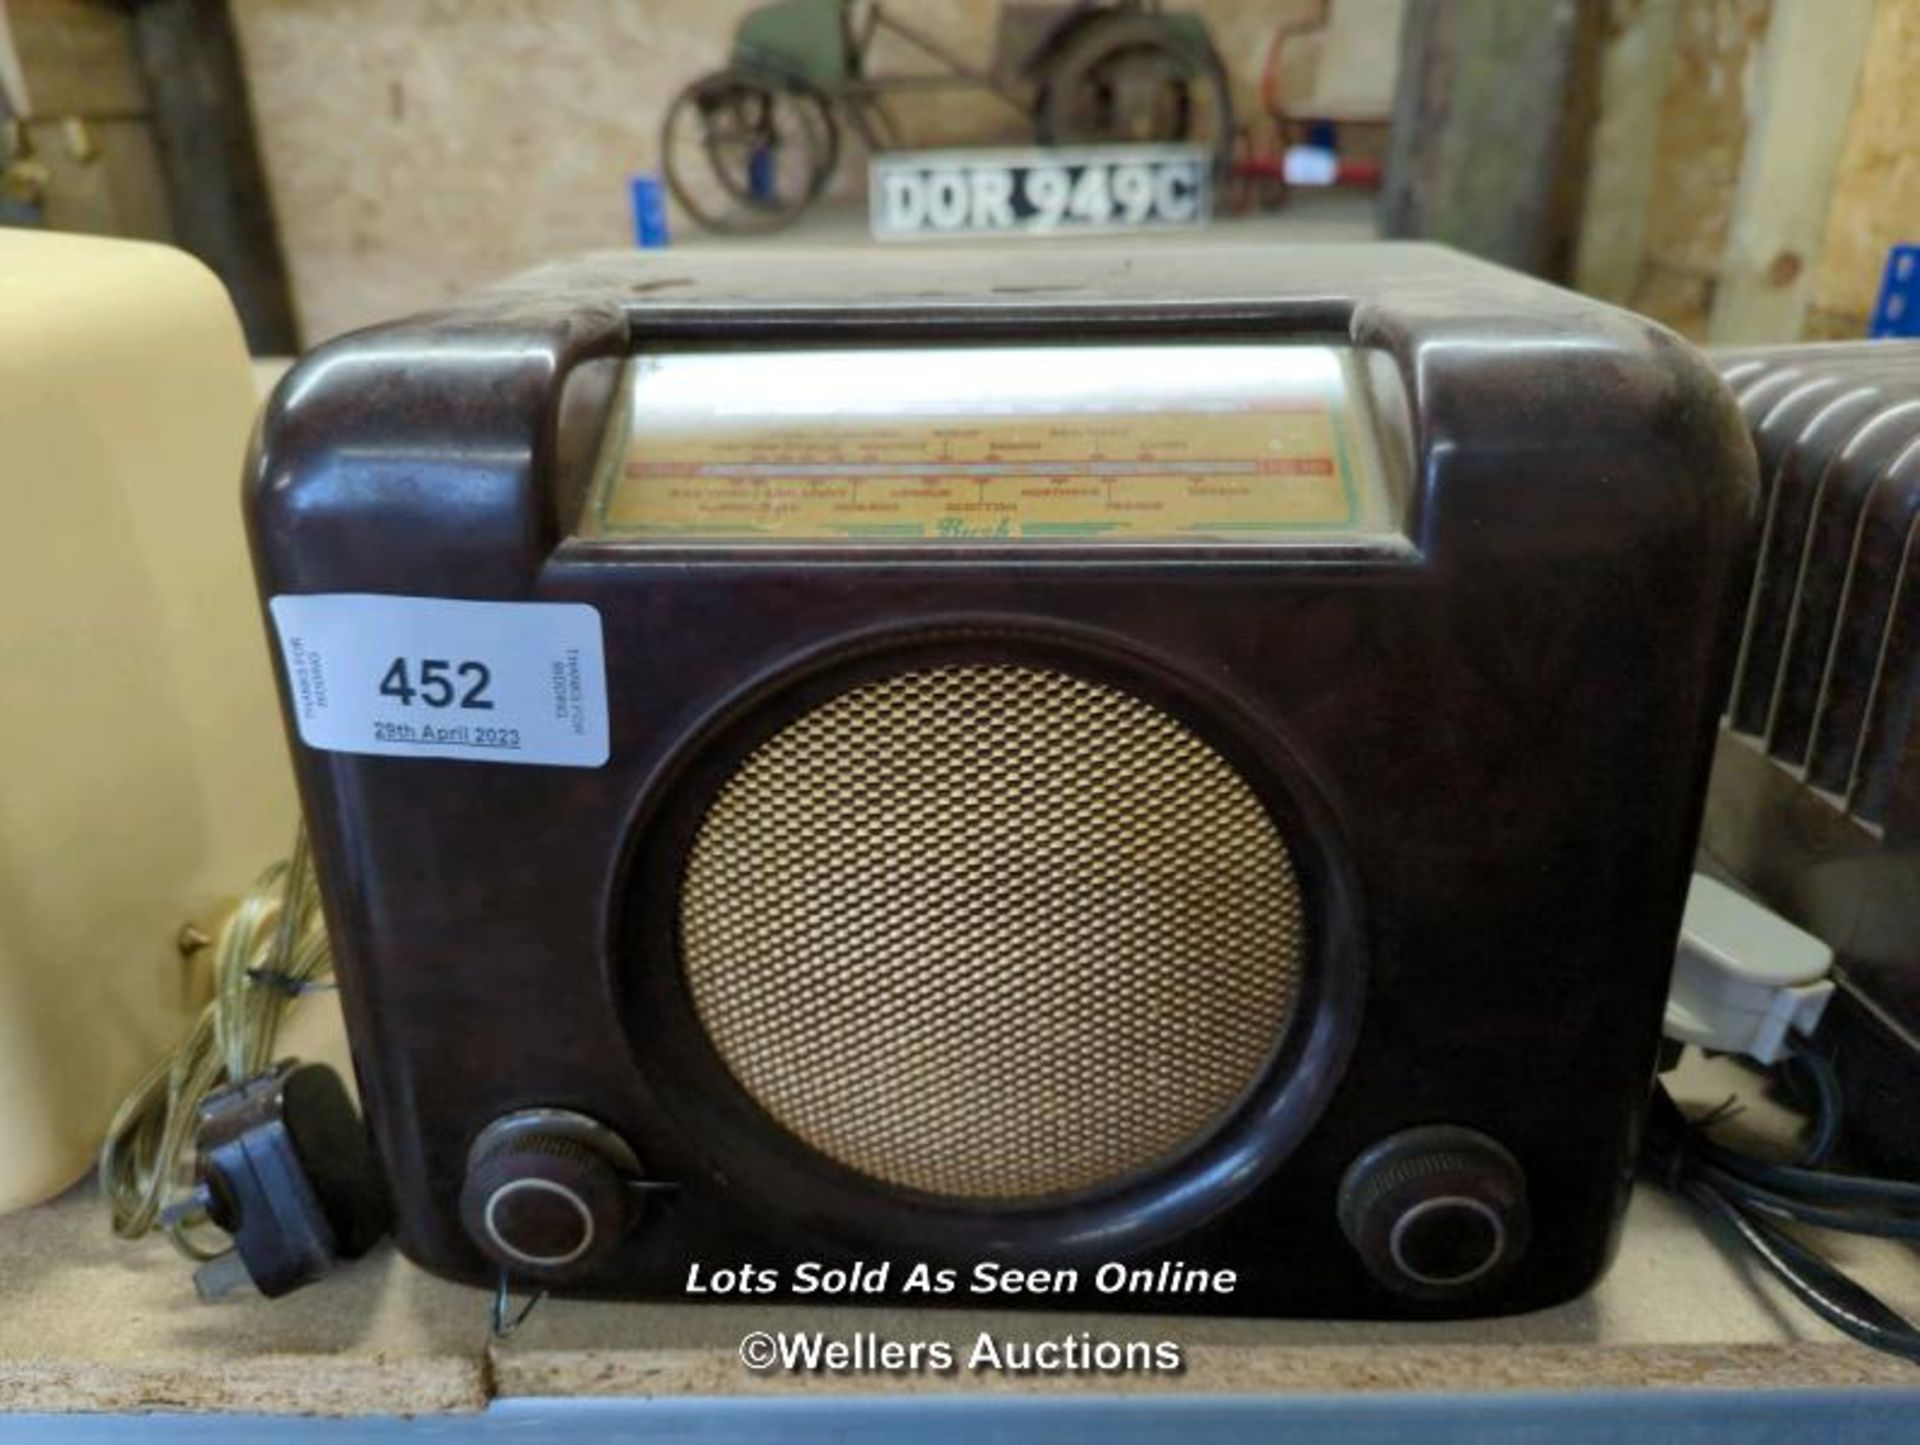 *VINTAGE BUSH RADIO, SERIAL NO: 73/212073, REPORTED AS WORKING (NO GUARANTEE) / ALL LOTS ARE LOCATED